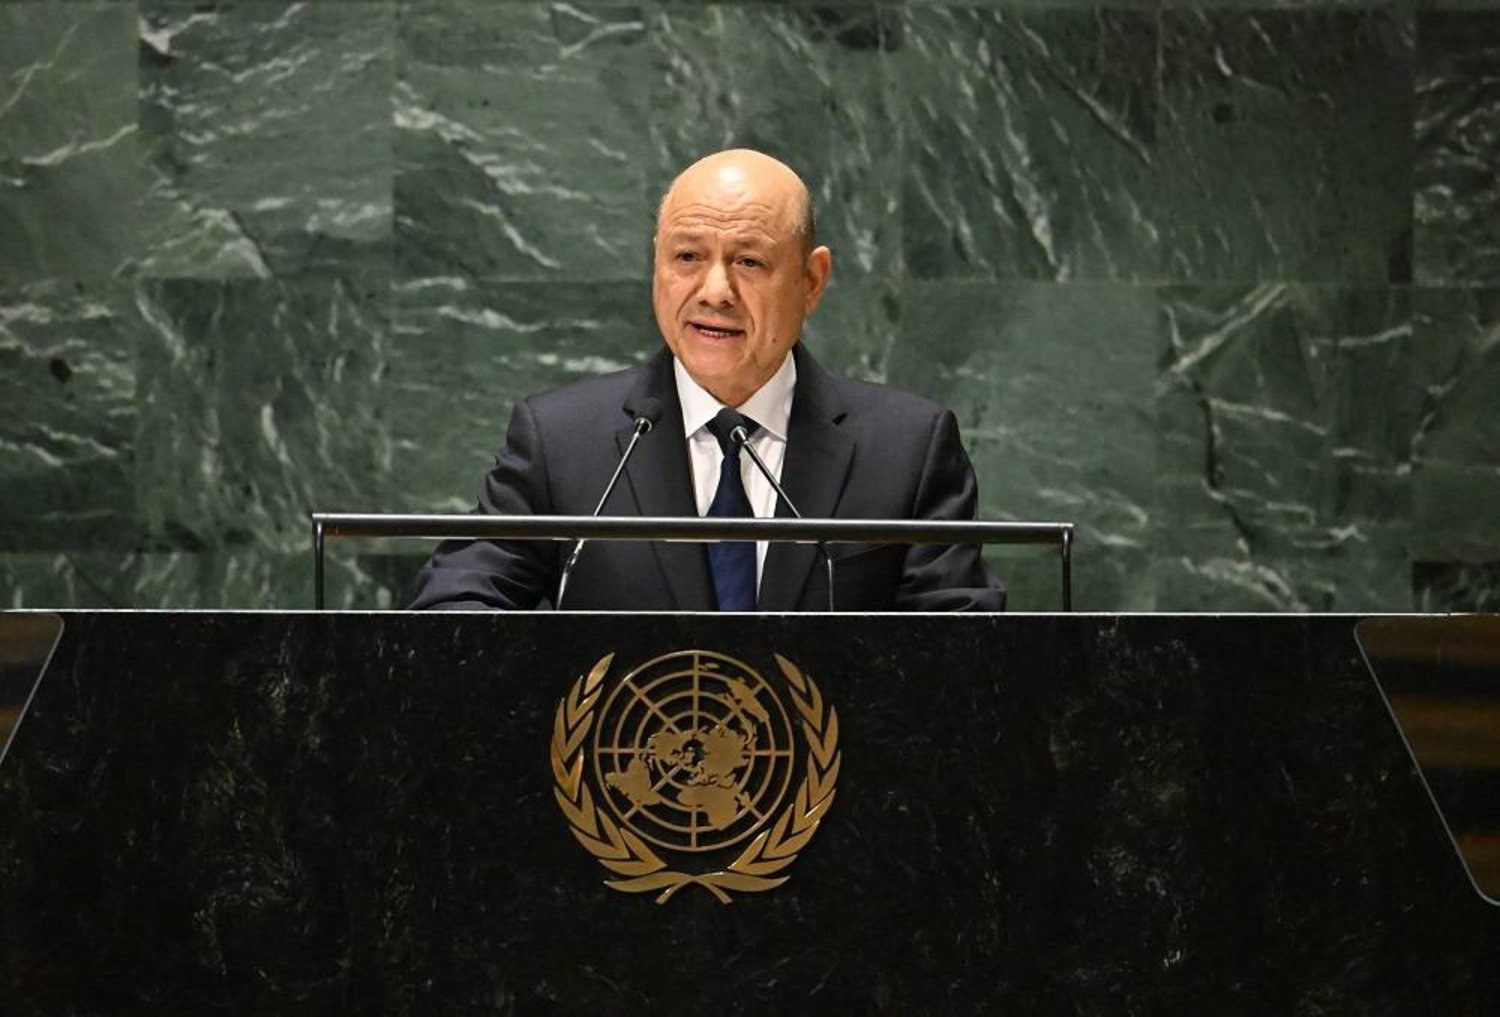  Chairman of Yemen's Presidential Leadership Council, Dr. Rashad al-Alimi, addresses the 78th United Nations General Assembly at UN headquarters in New York City on September 21, 2023. (AFP)